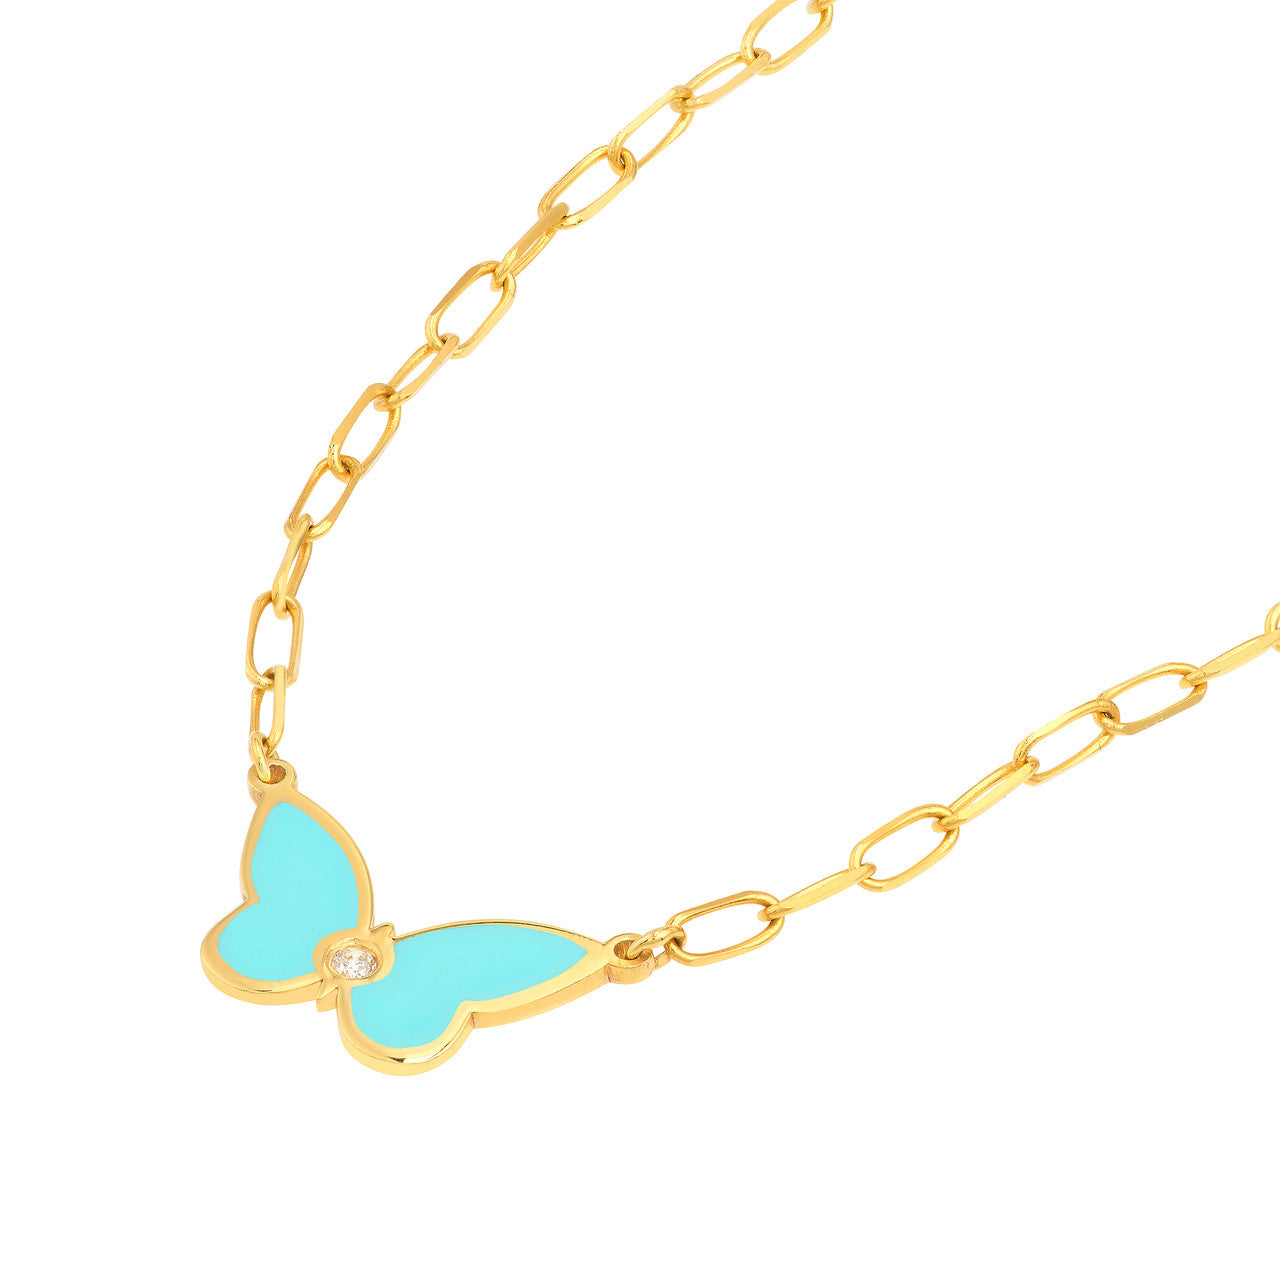 Diamond and 14K Gold - Serene Butterfly Elegance Necklace